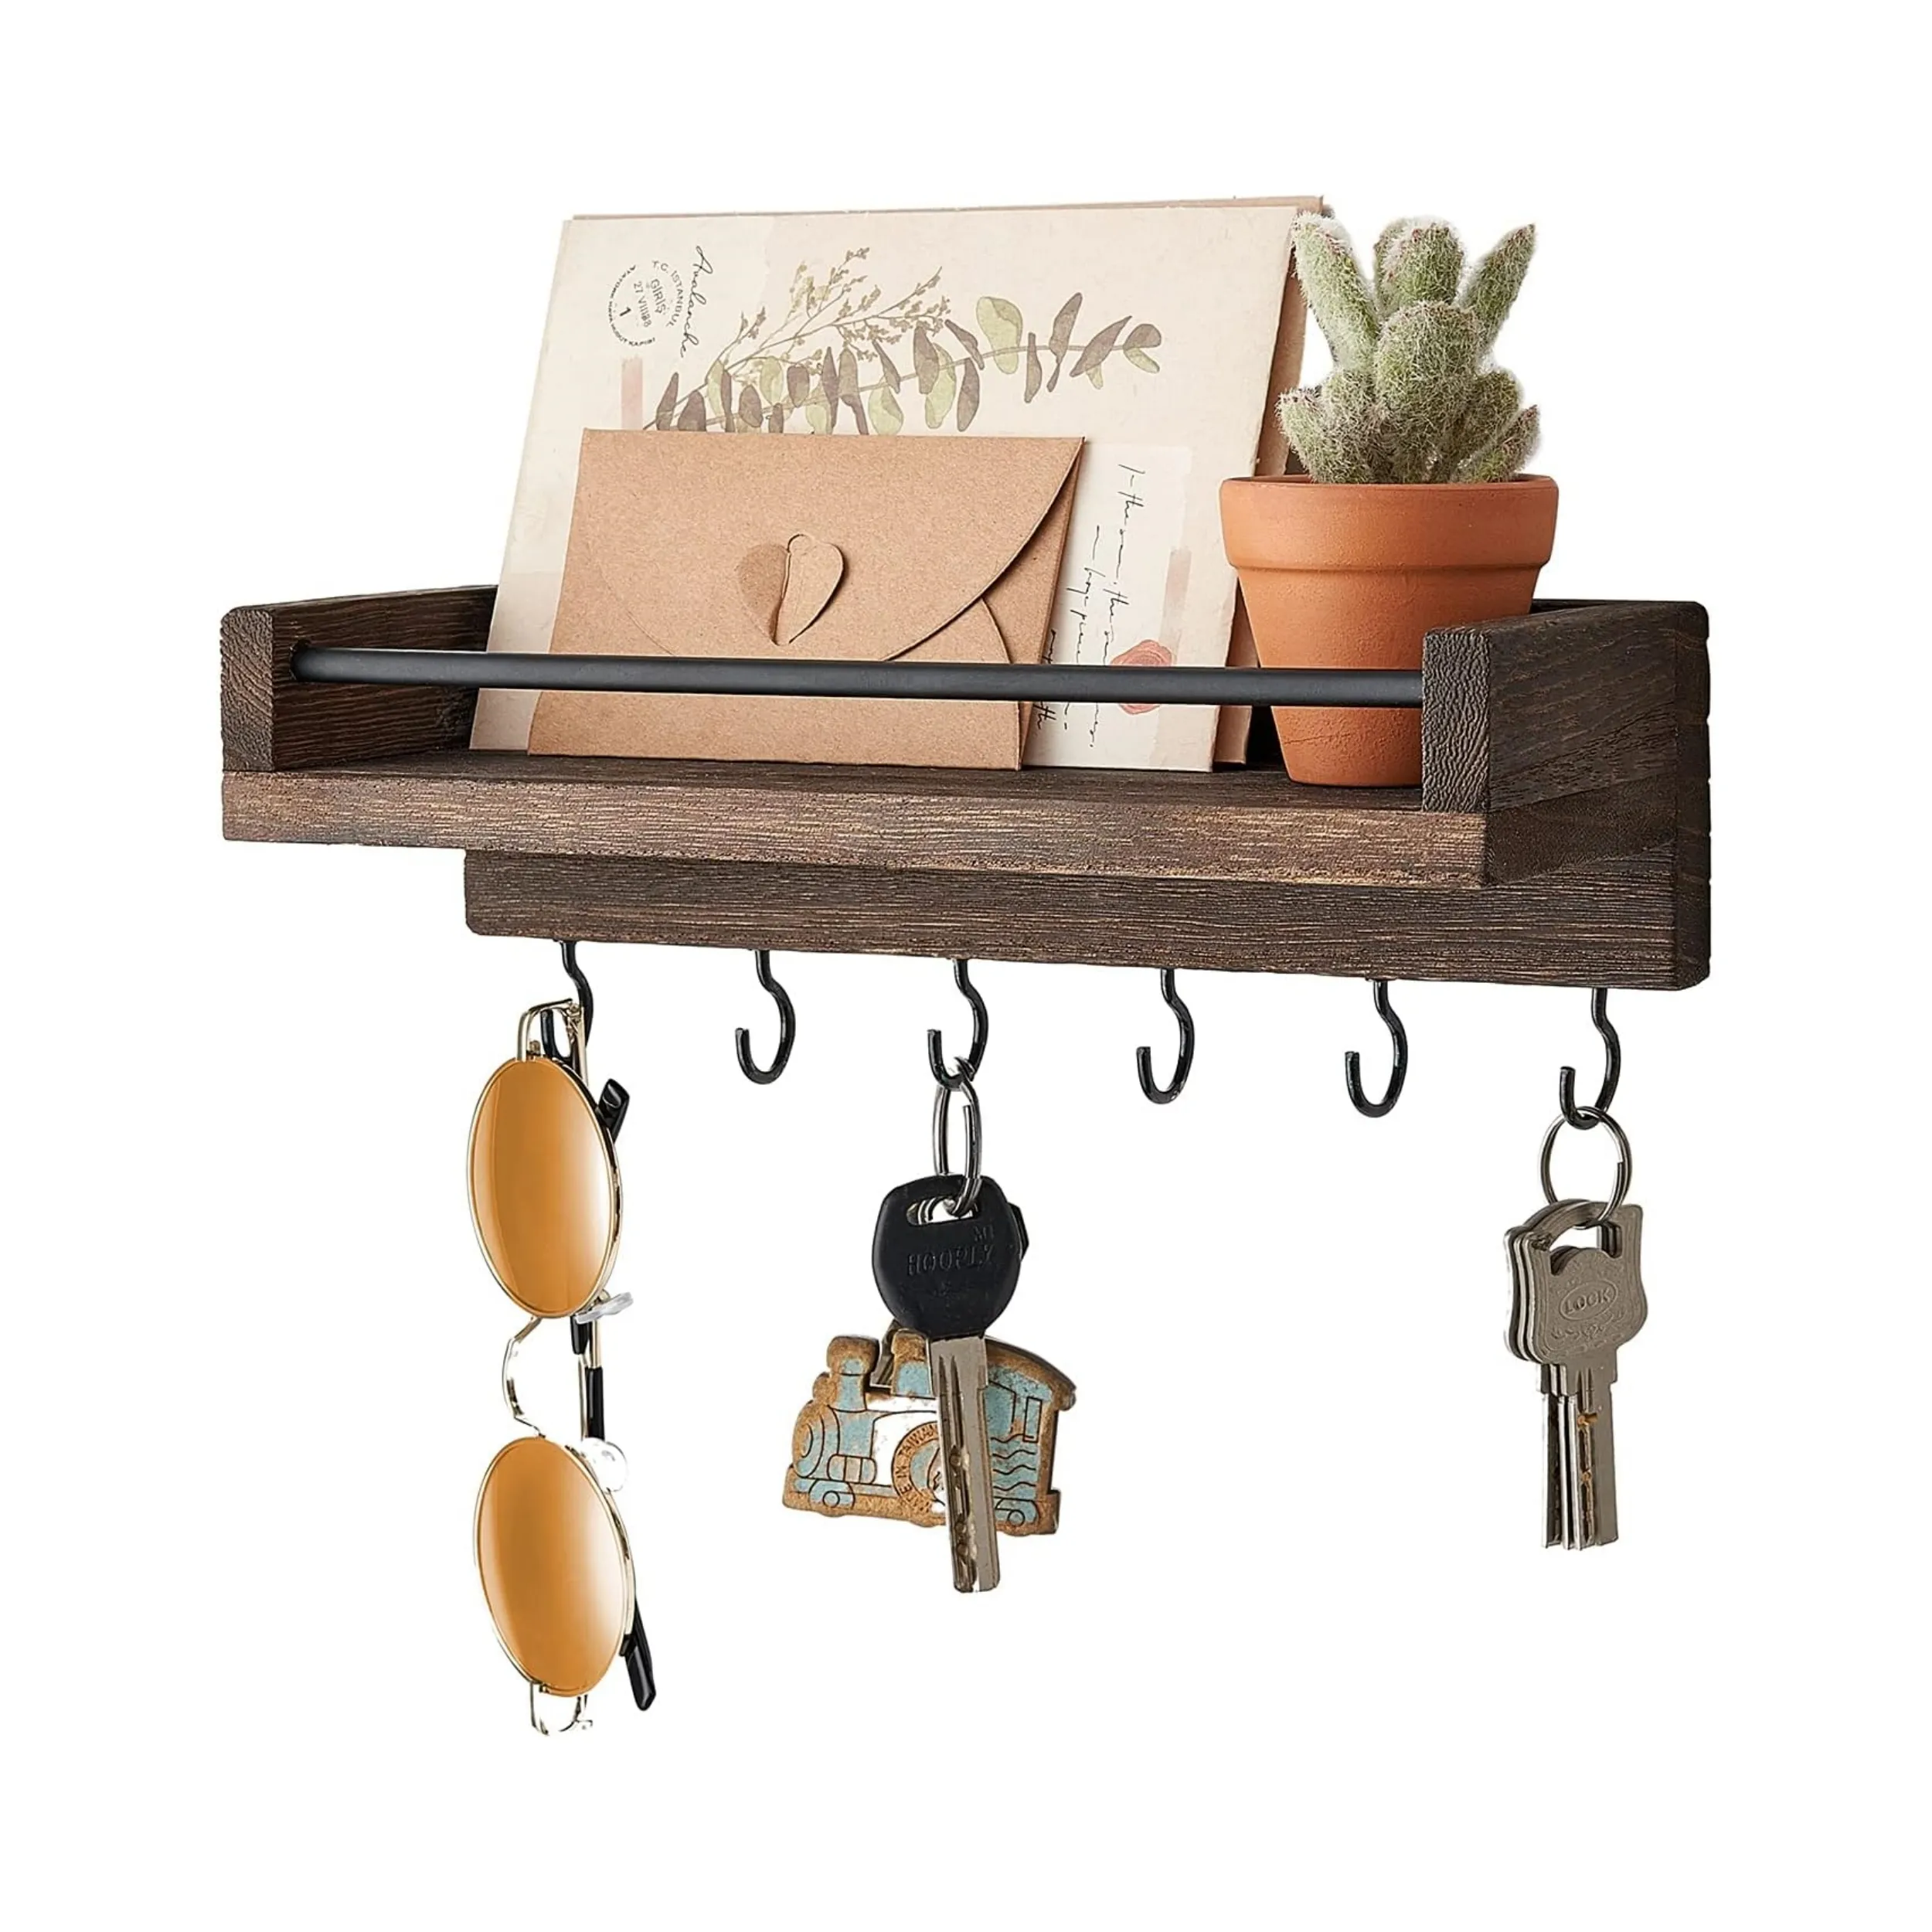 Wooden Mail and Key Organizer Solid Wood Wall Mounted Wooden Mail and Key Holder Wall Shelf with 6 Key Hooks